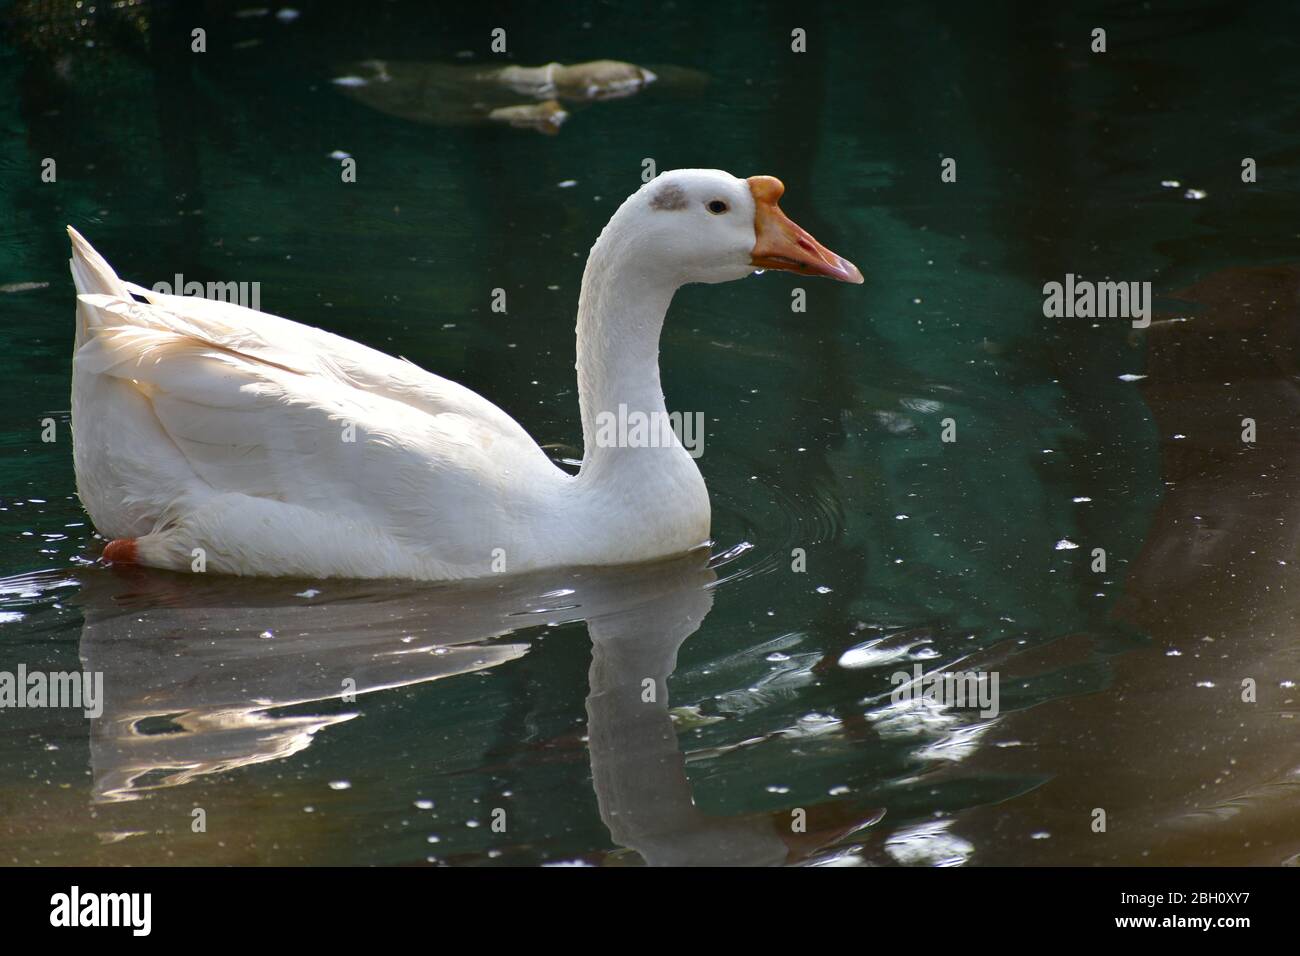 White Domestic Duck in Lake Pond Water Stock Photo